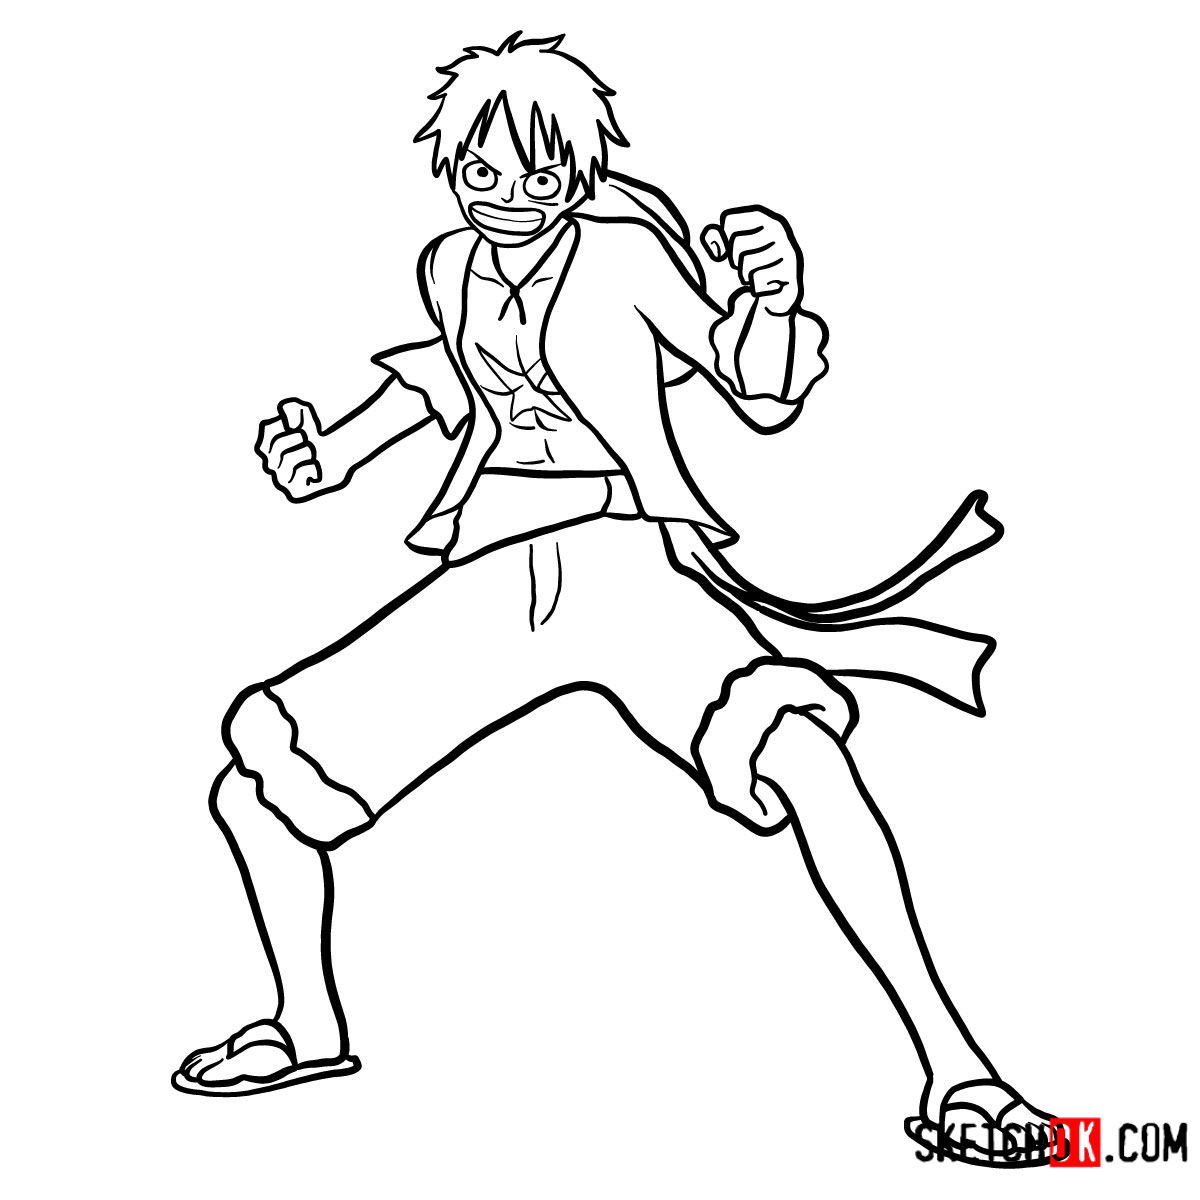 How to draw Monkey D. Luffy full growth